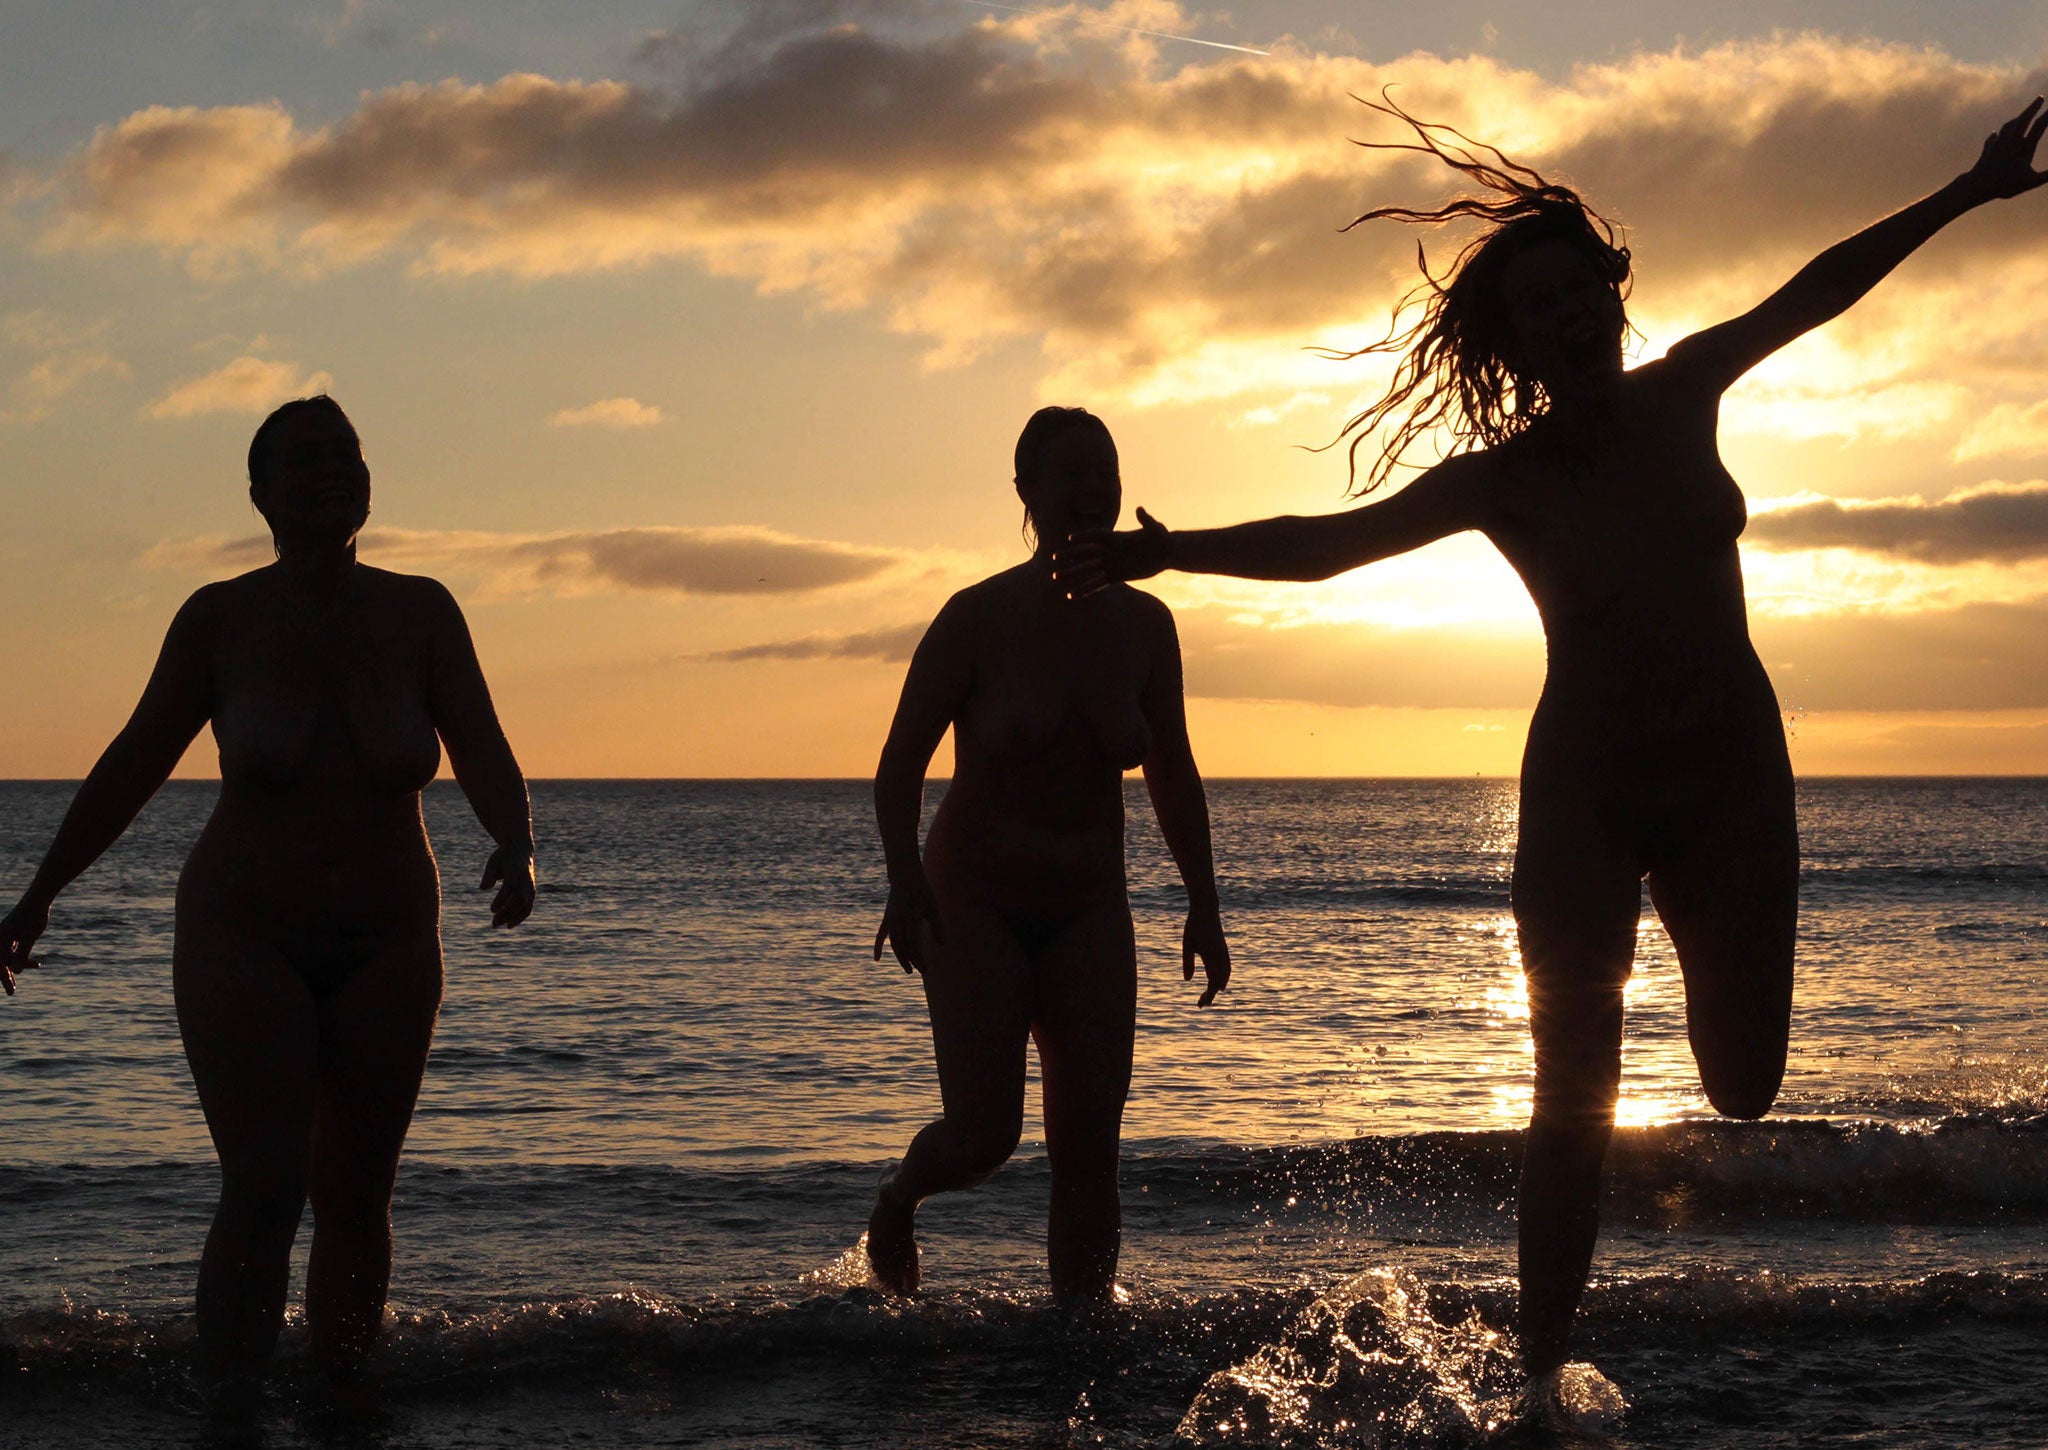 Nudists take part in the annual North East Skinny Dip as the sun rises at Druridge Bay in Northumberland